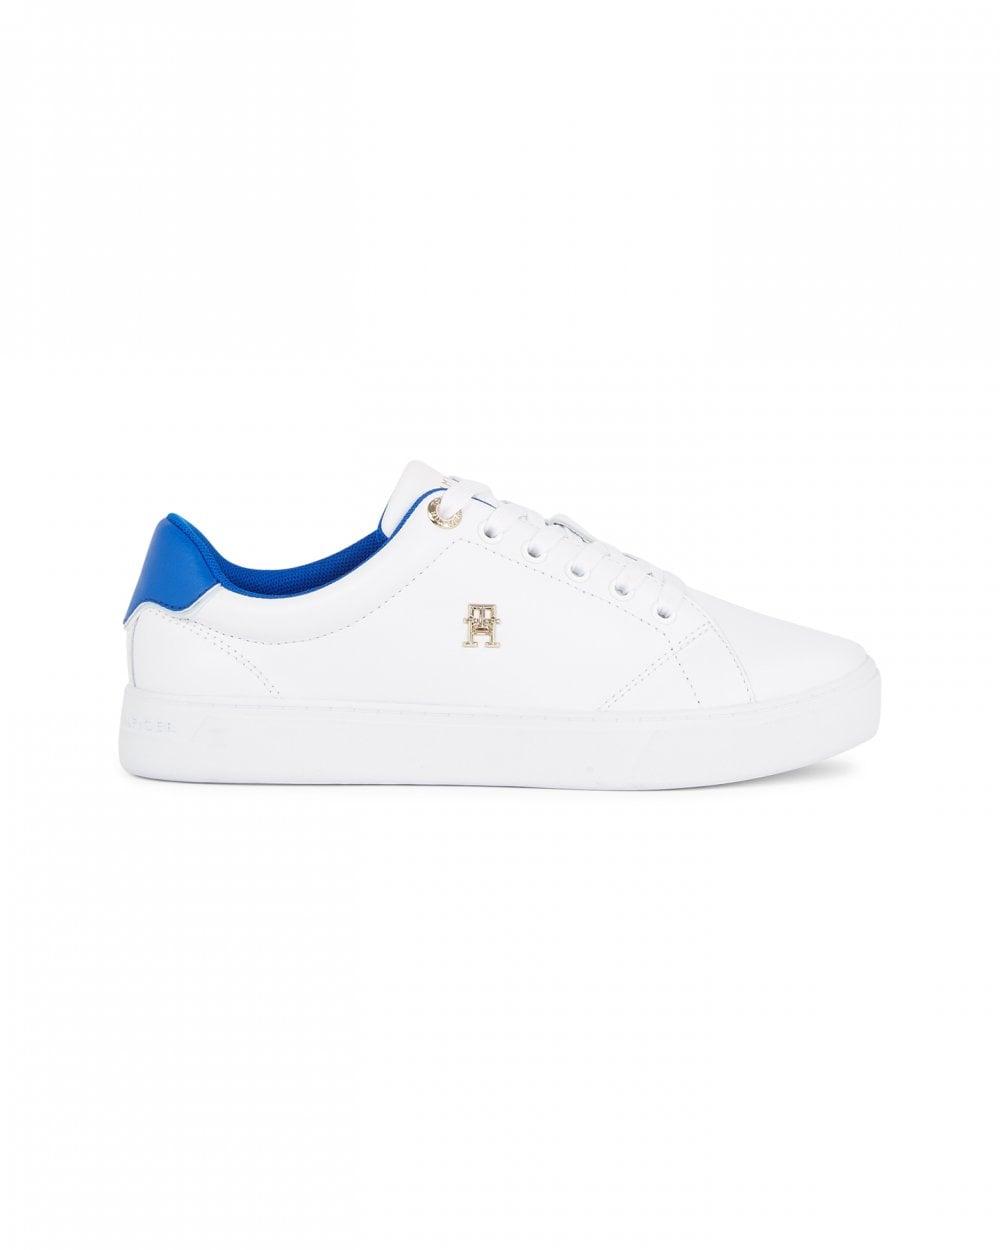 Tommy Hilfiger Iconic Court Alt Sneakers TH100020C Hook and Loop Navy